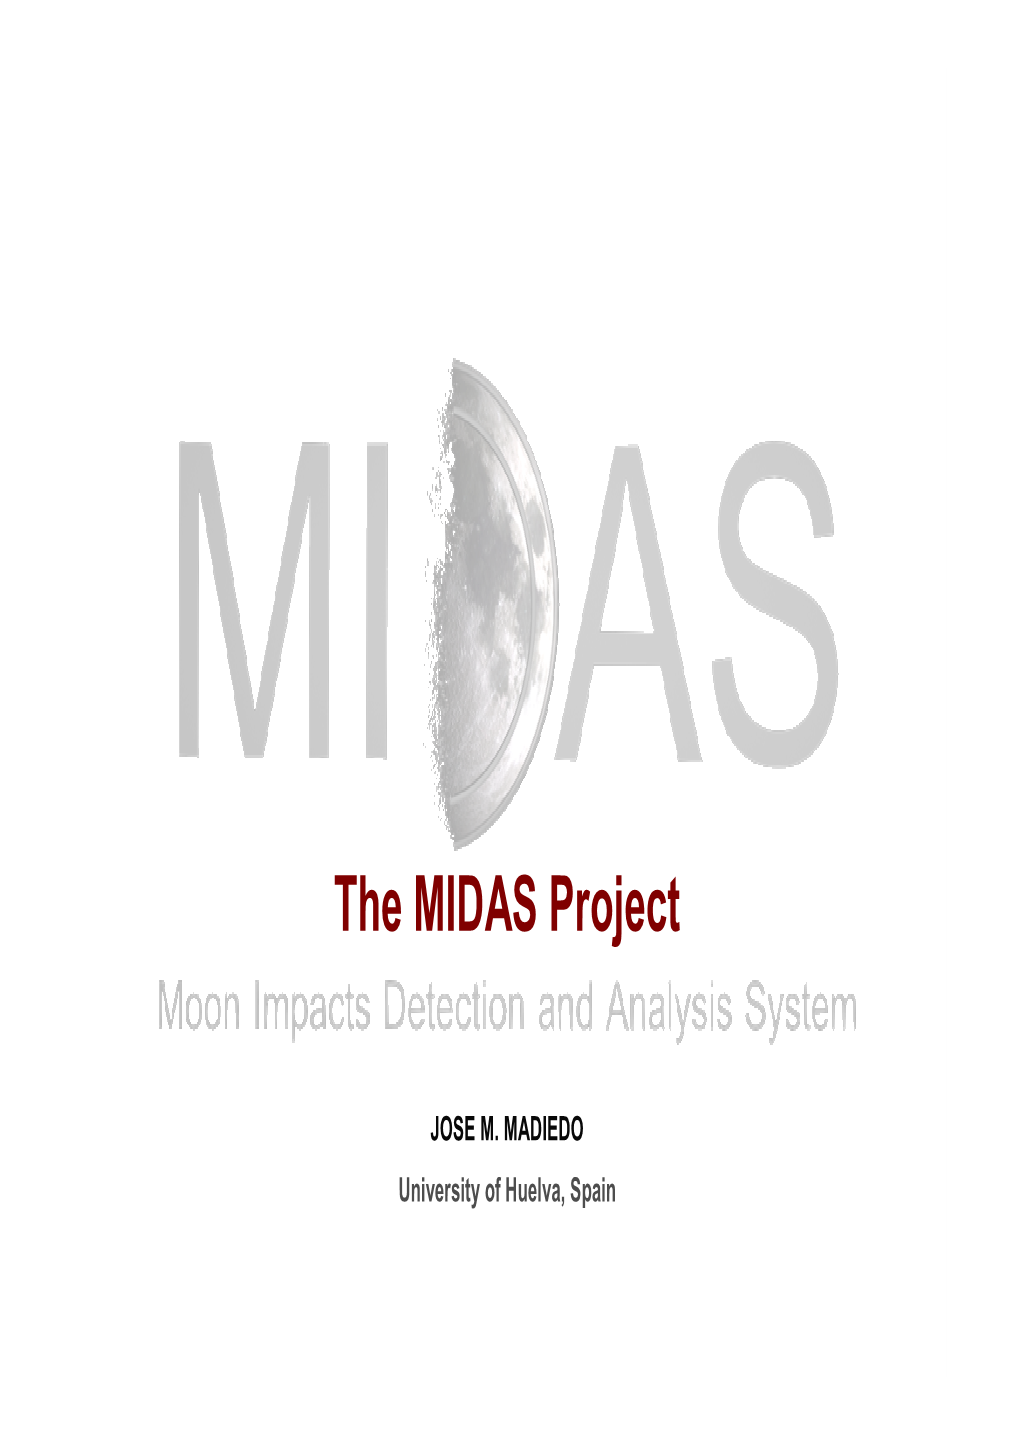 The MIDAS Project